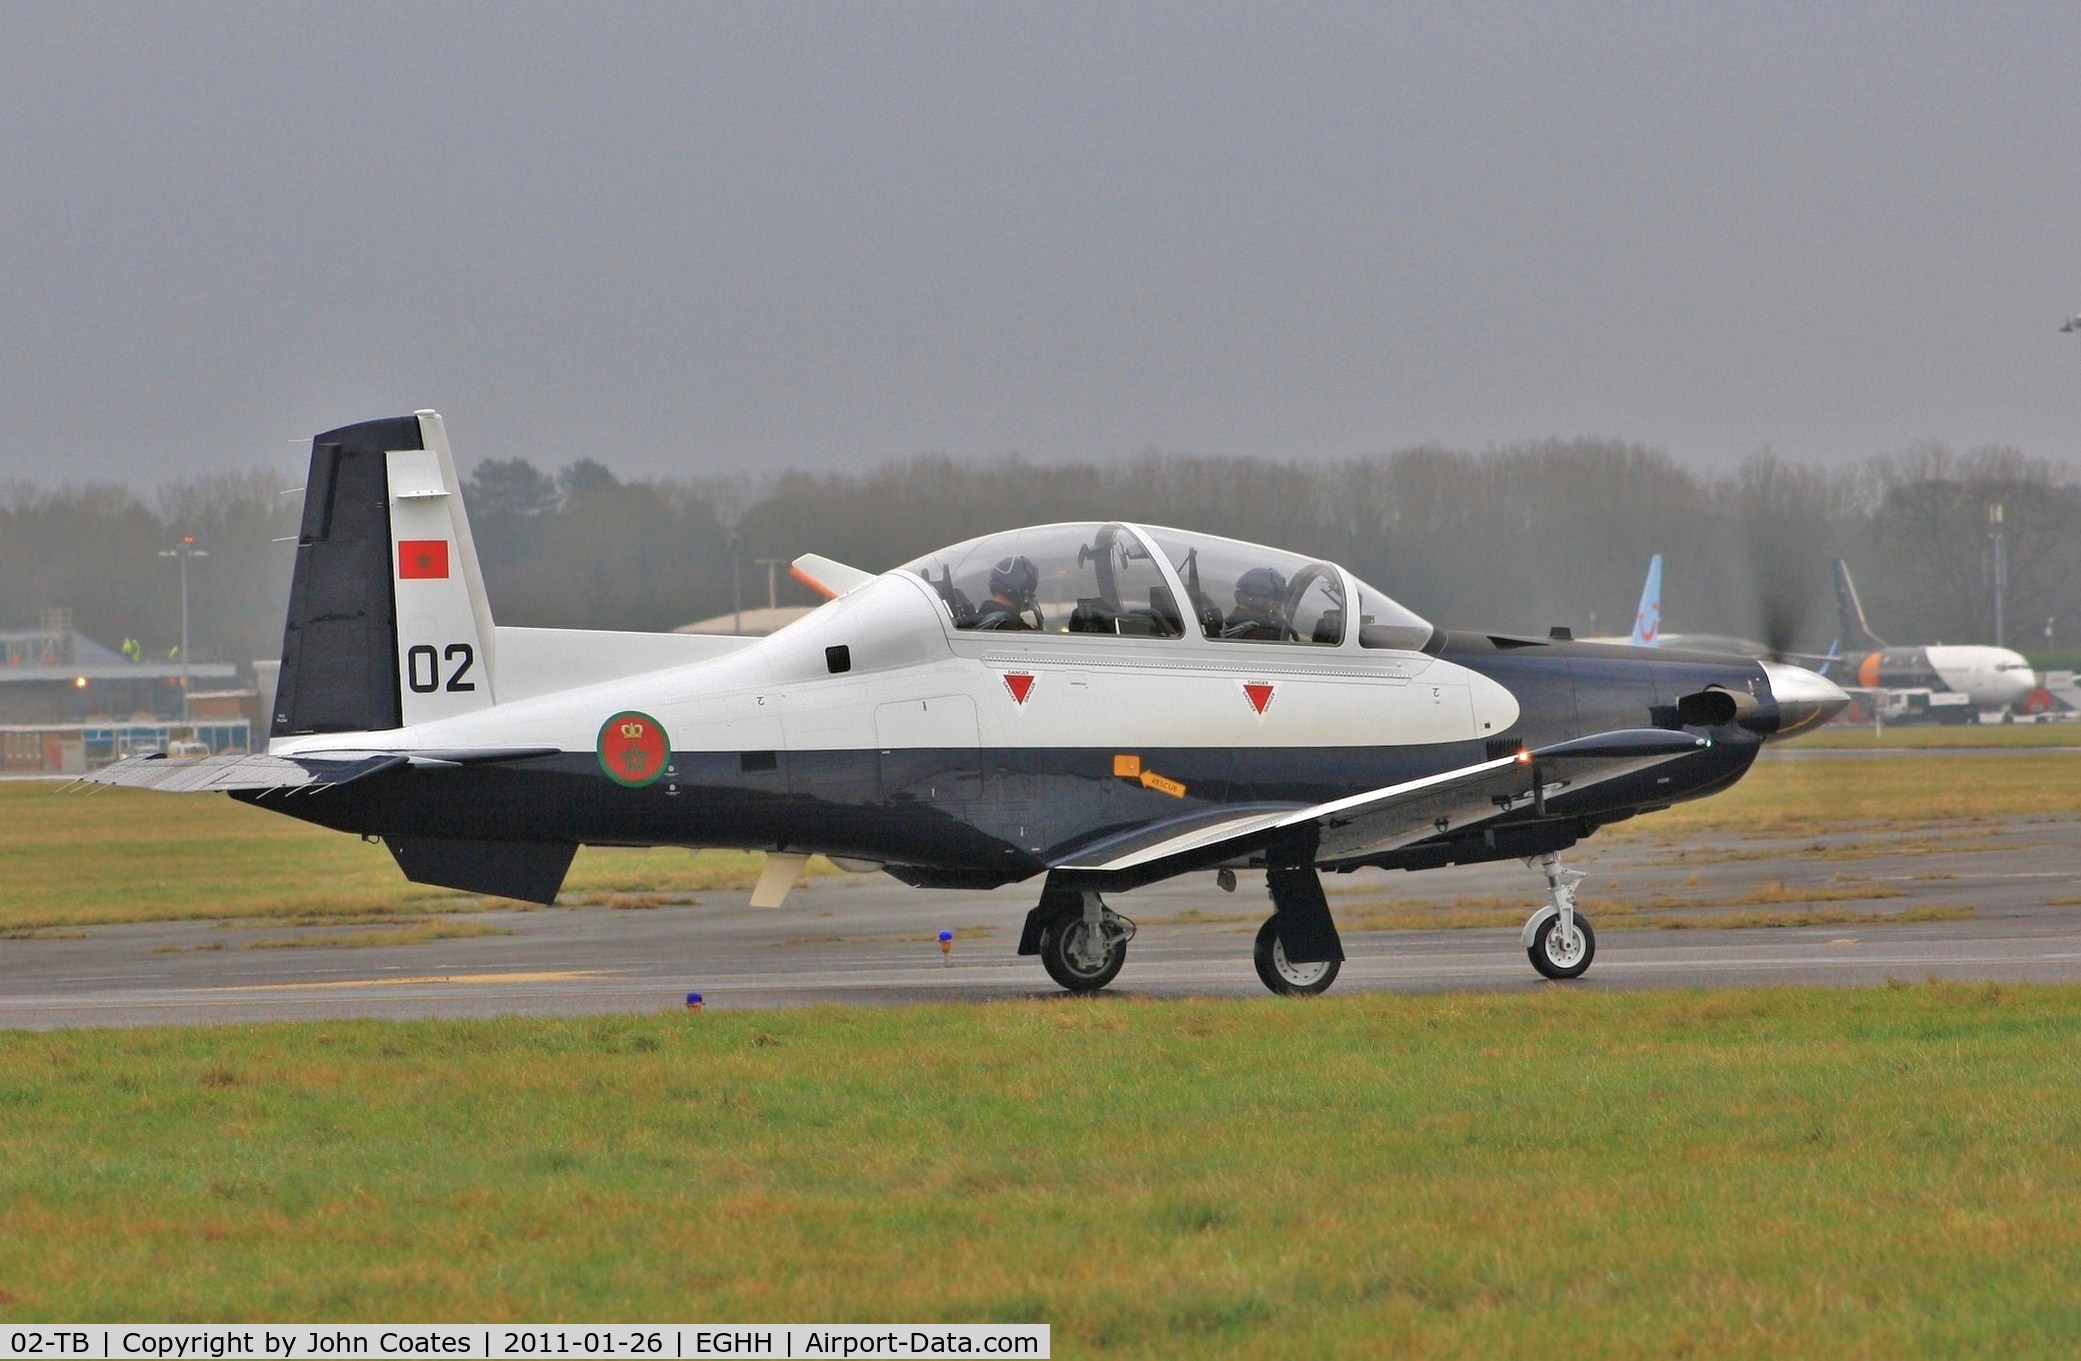 02-TB, 2010 Raytheon T-6C Texan II C/N PM-2, About to depart on delivery